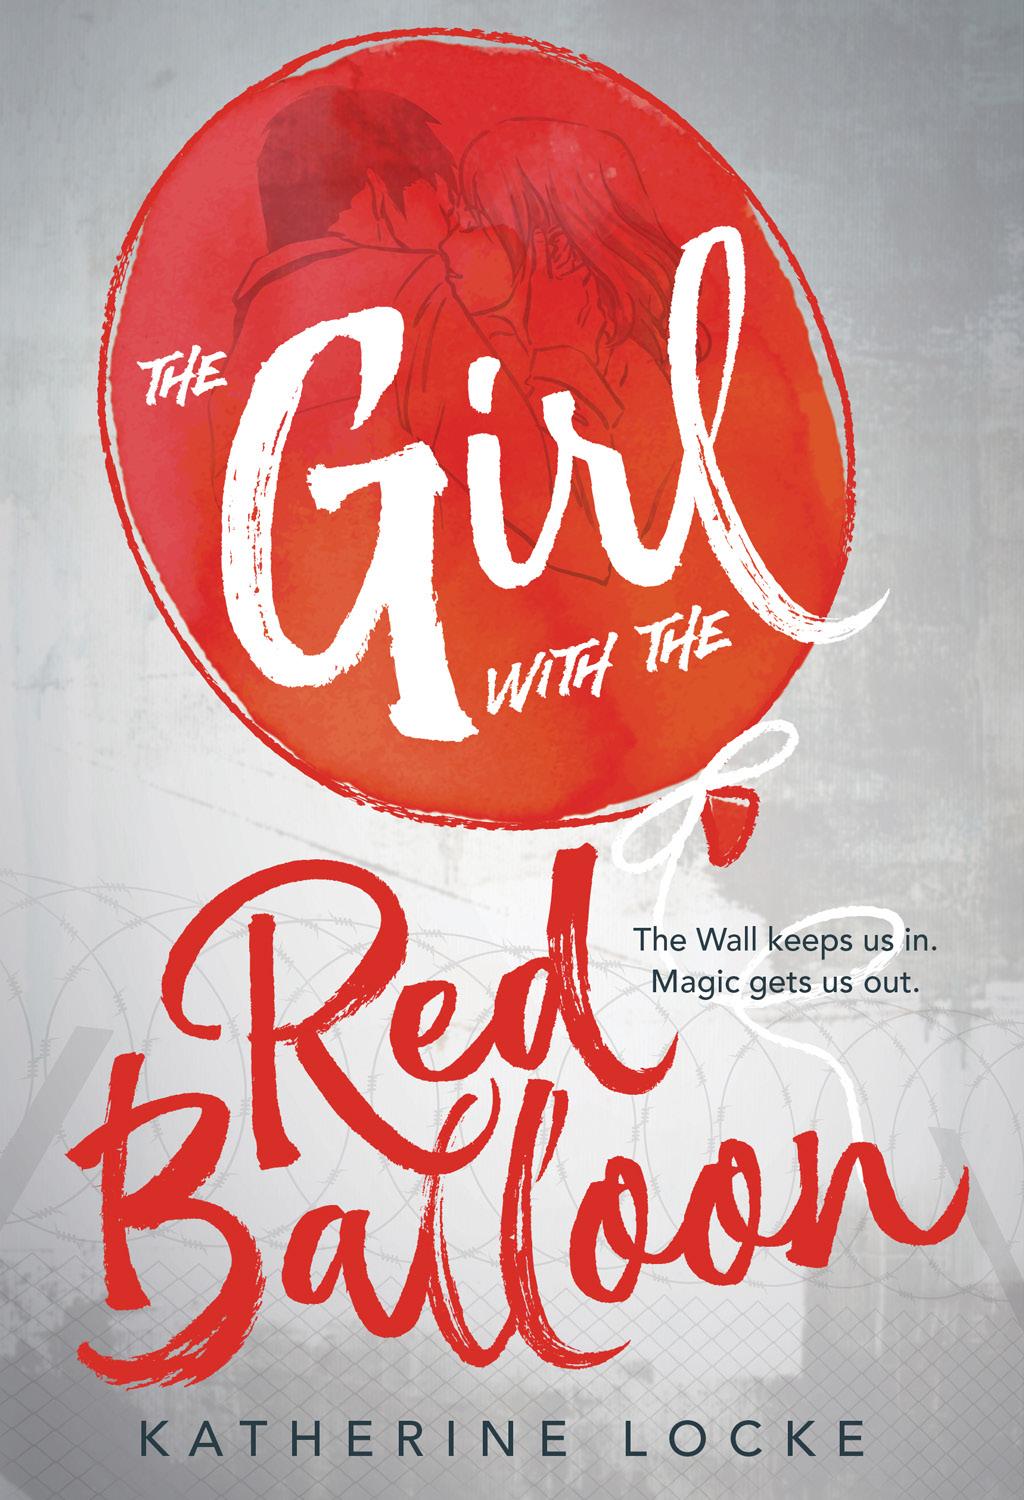 A READER S GUIDE TO Katherine Locke About The Girl with the Red Balloon When sixteen-year-old Ellie Baum accidentally time-travels via red balloon to 1988 East